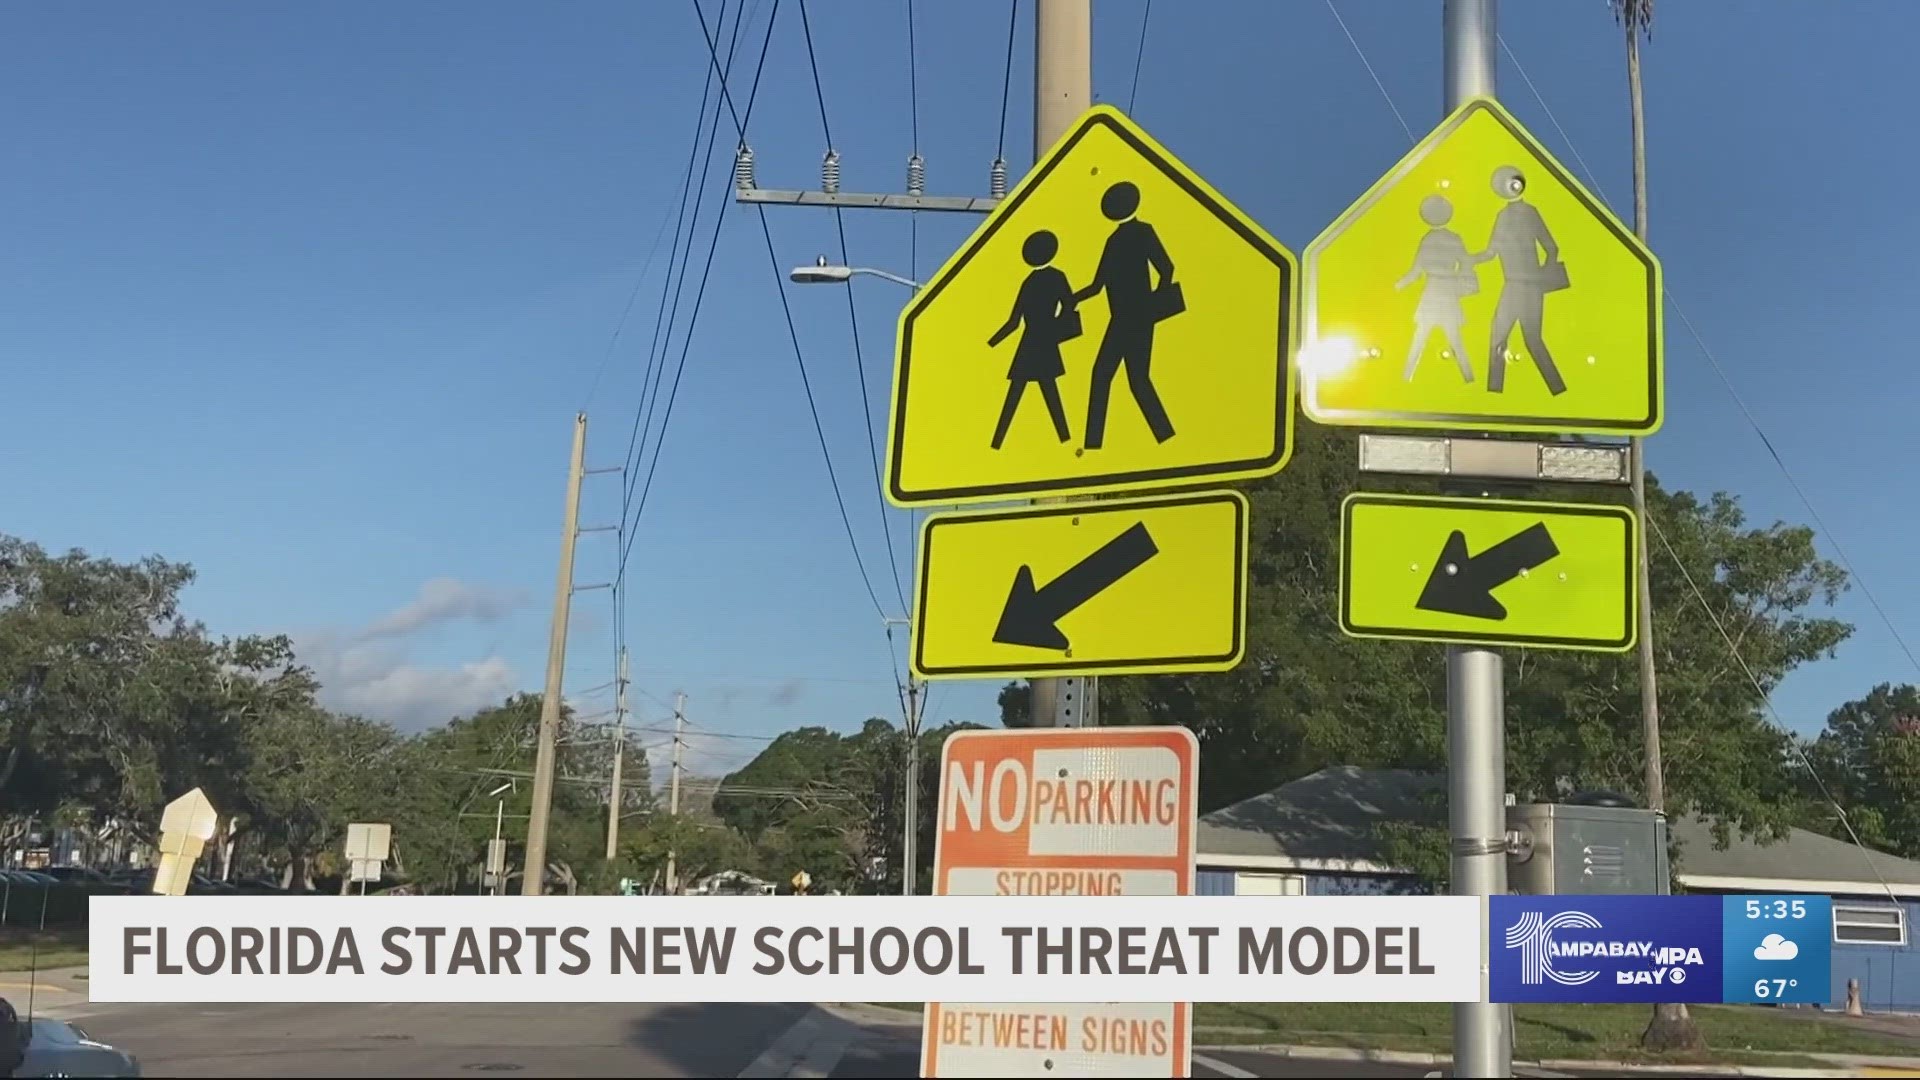 "The level of threat gets identified as low, medium or high," Pinellas County Sheriff Bob Gualtieri said.